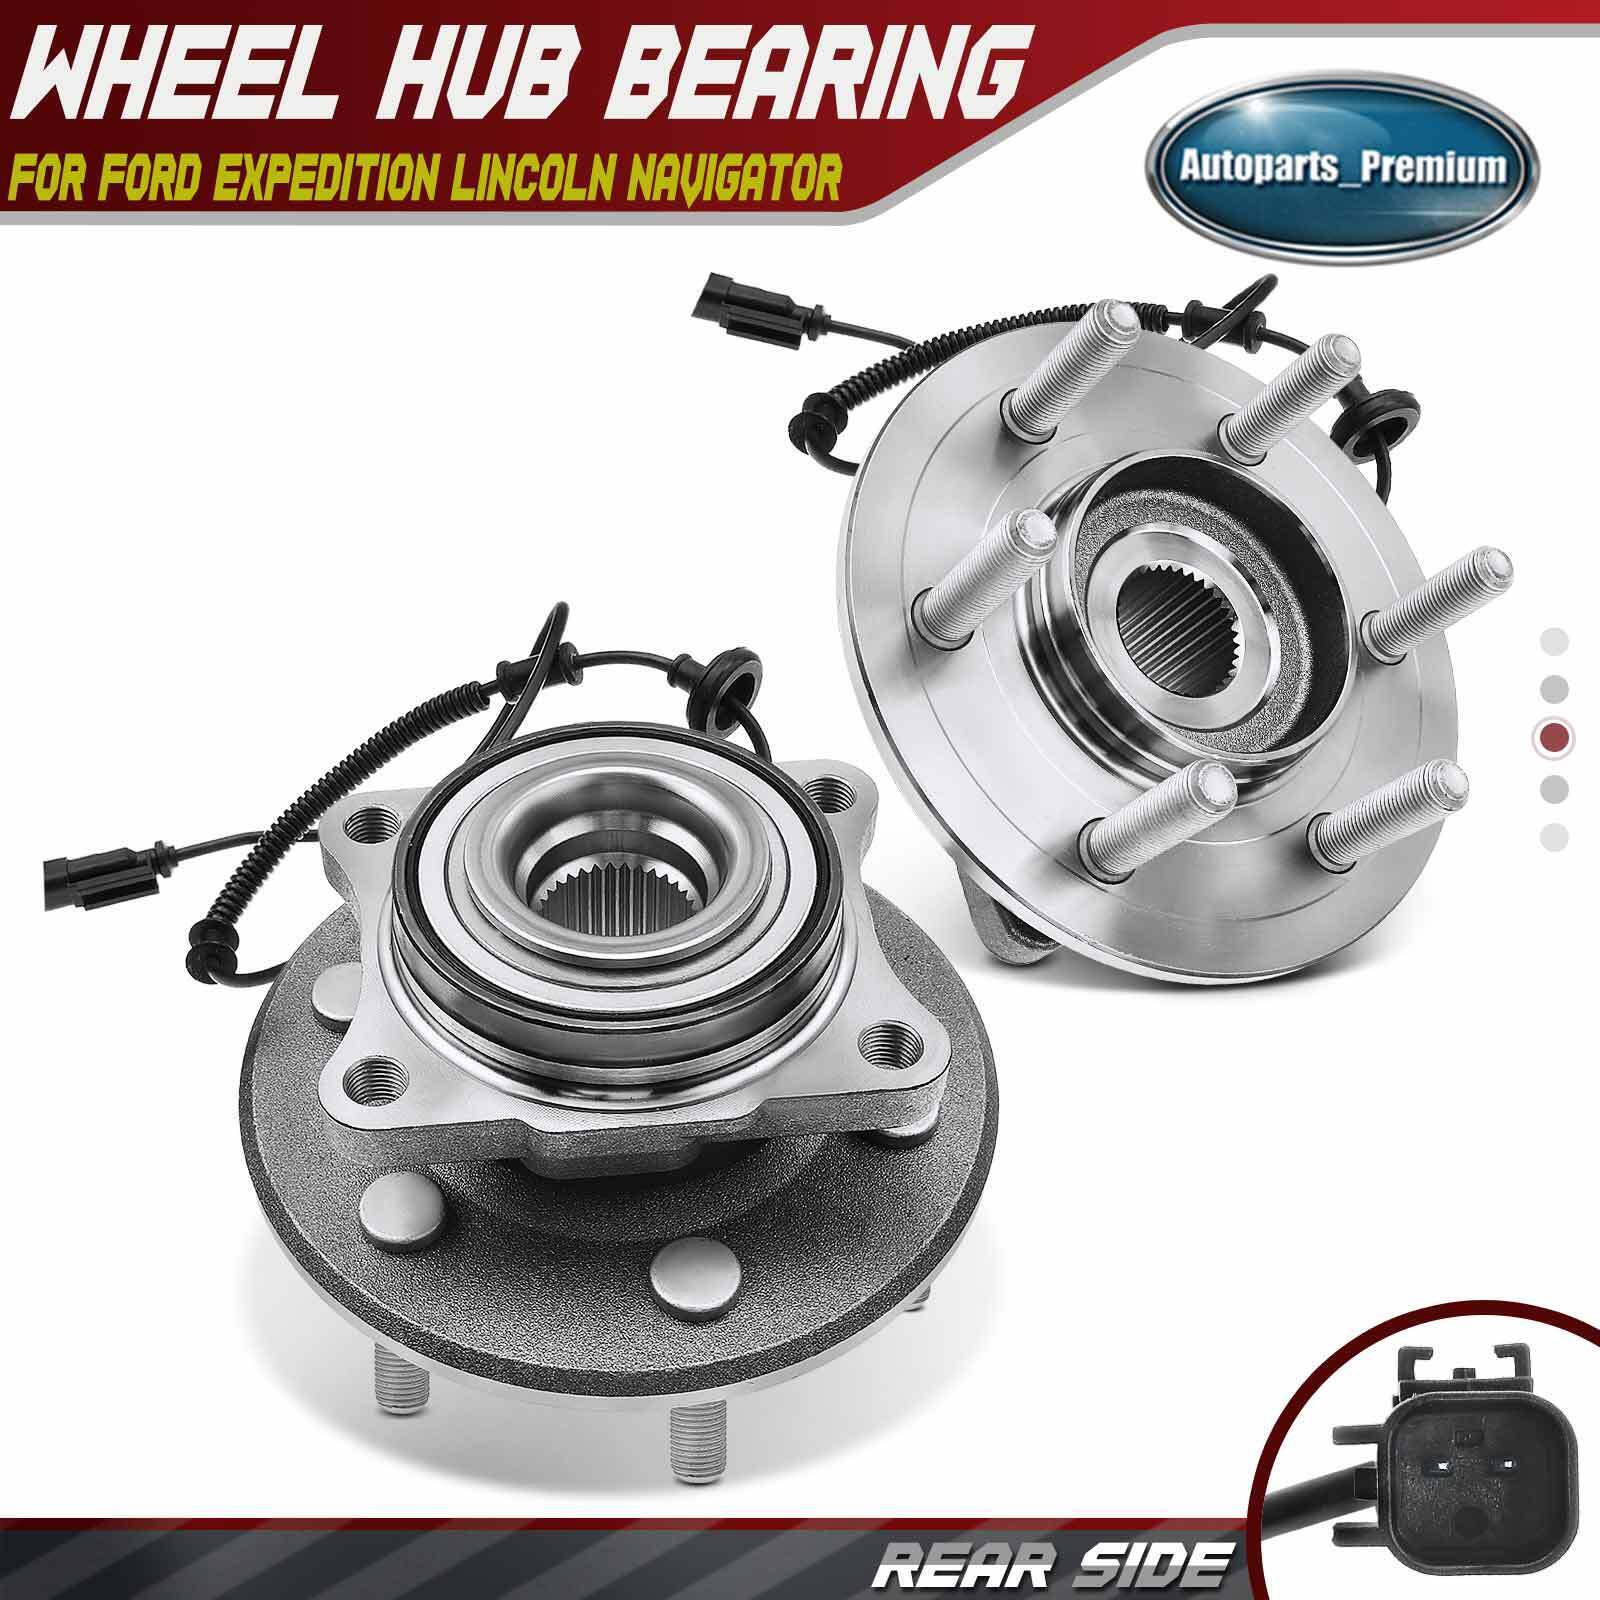 2x Rear Wheel Hub Bearing Assembly for Ford Expedition Lincoln Navigator 2015-17